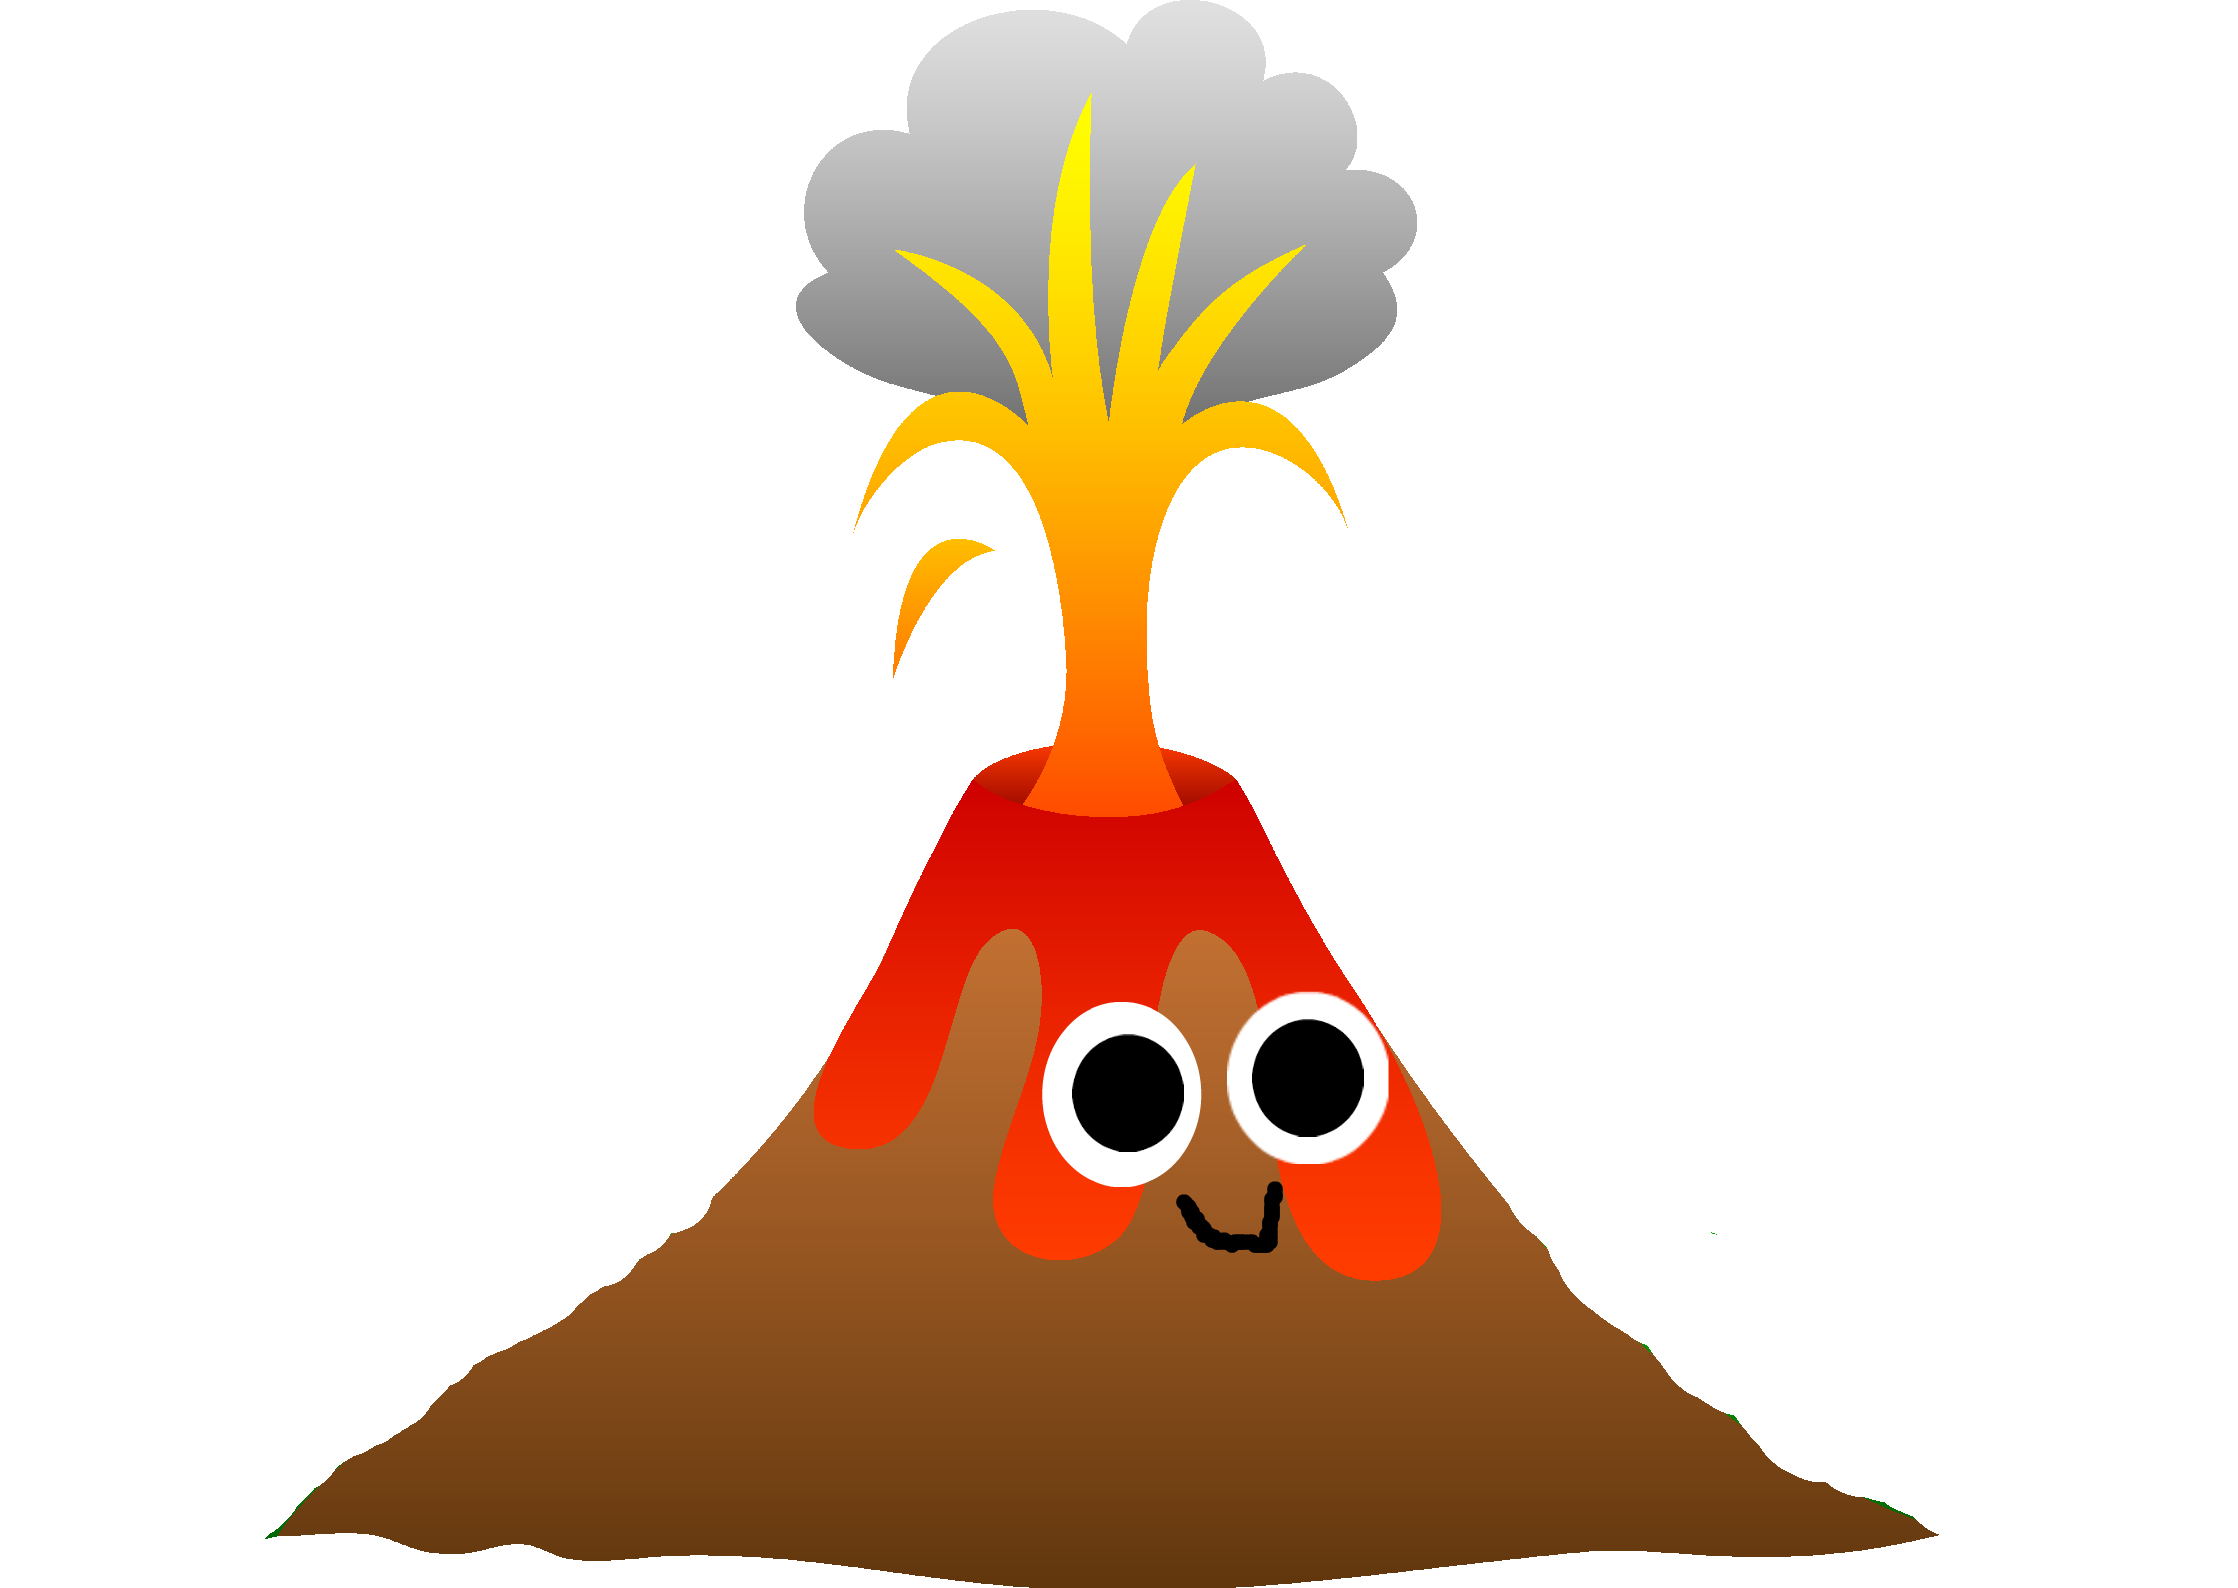 Volcano PNG Image